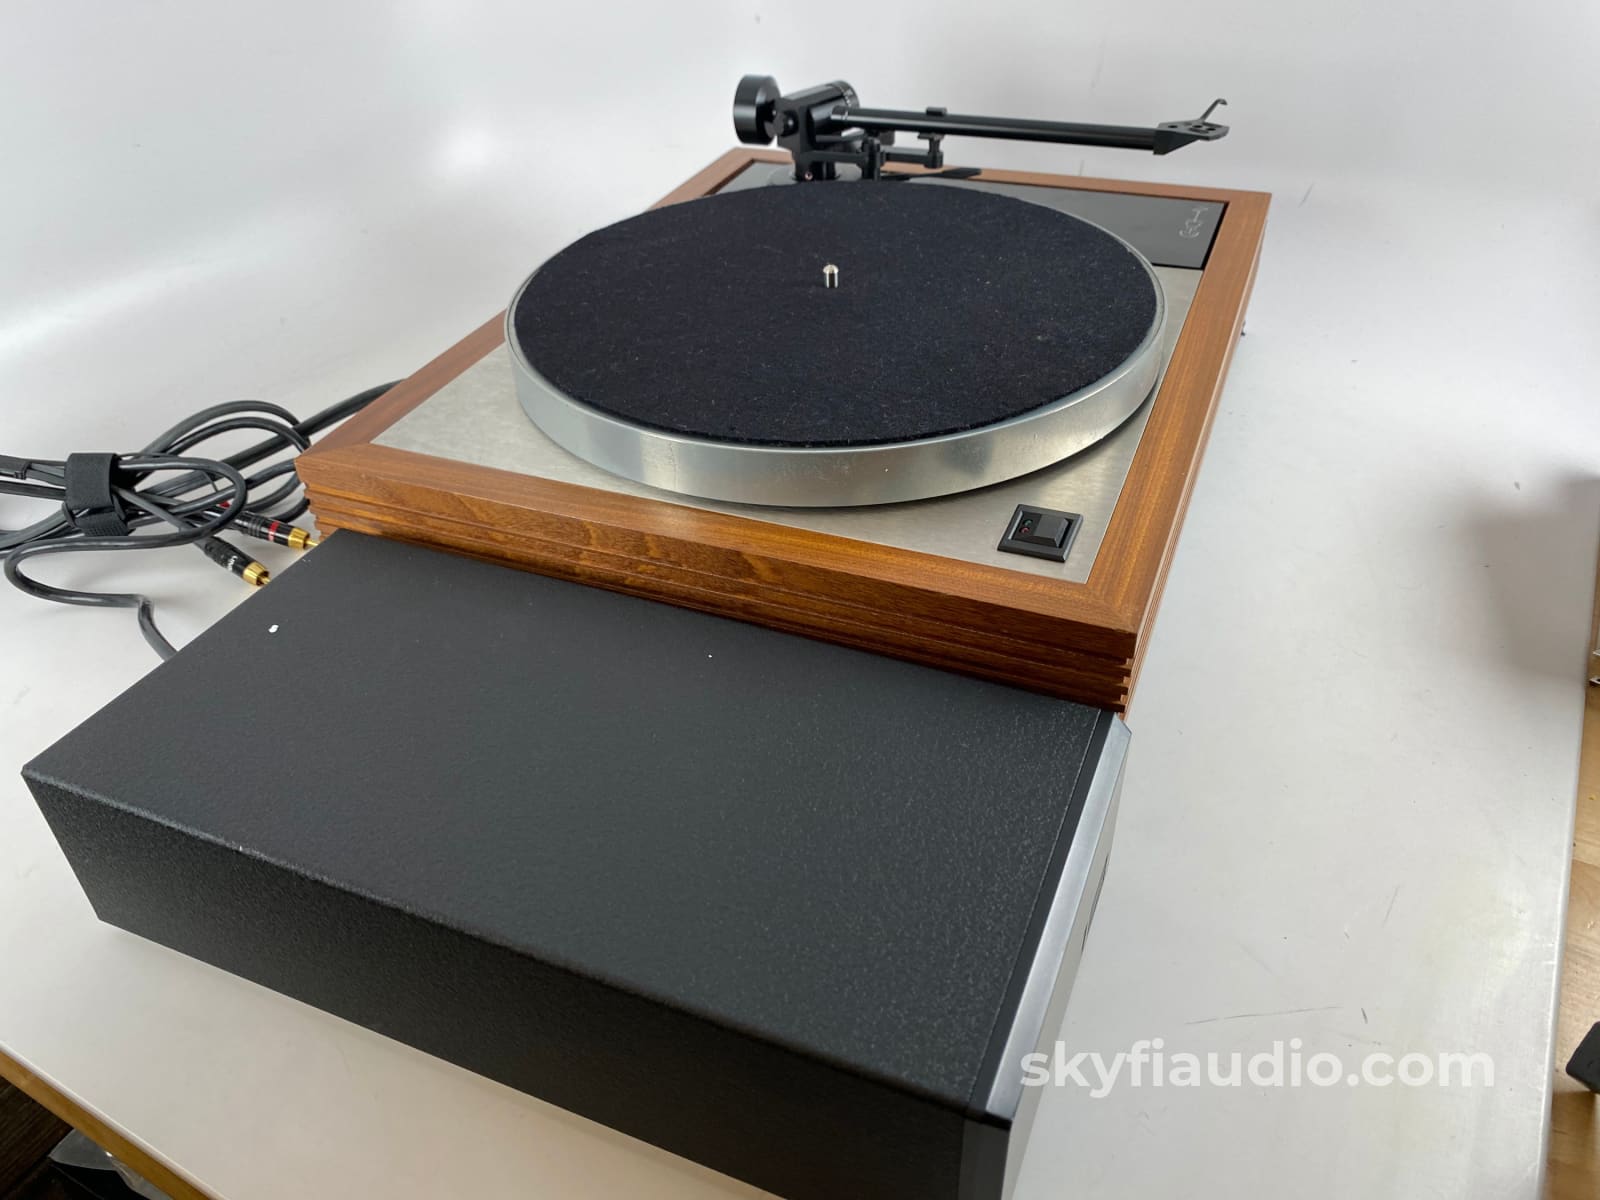 Linn Lp12 Turntable With Lingo Power Supply And New Sumiko Cartridge